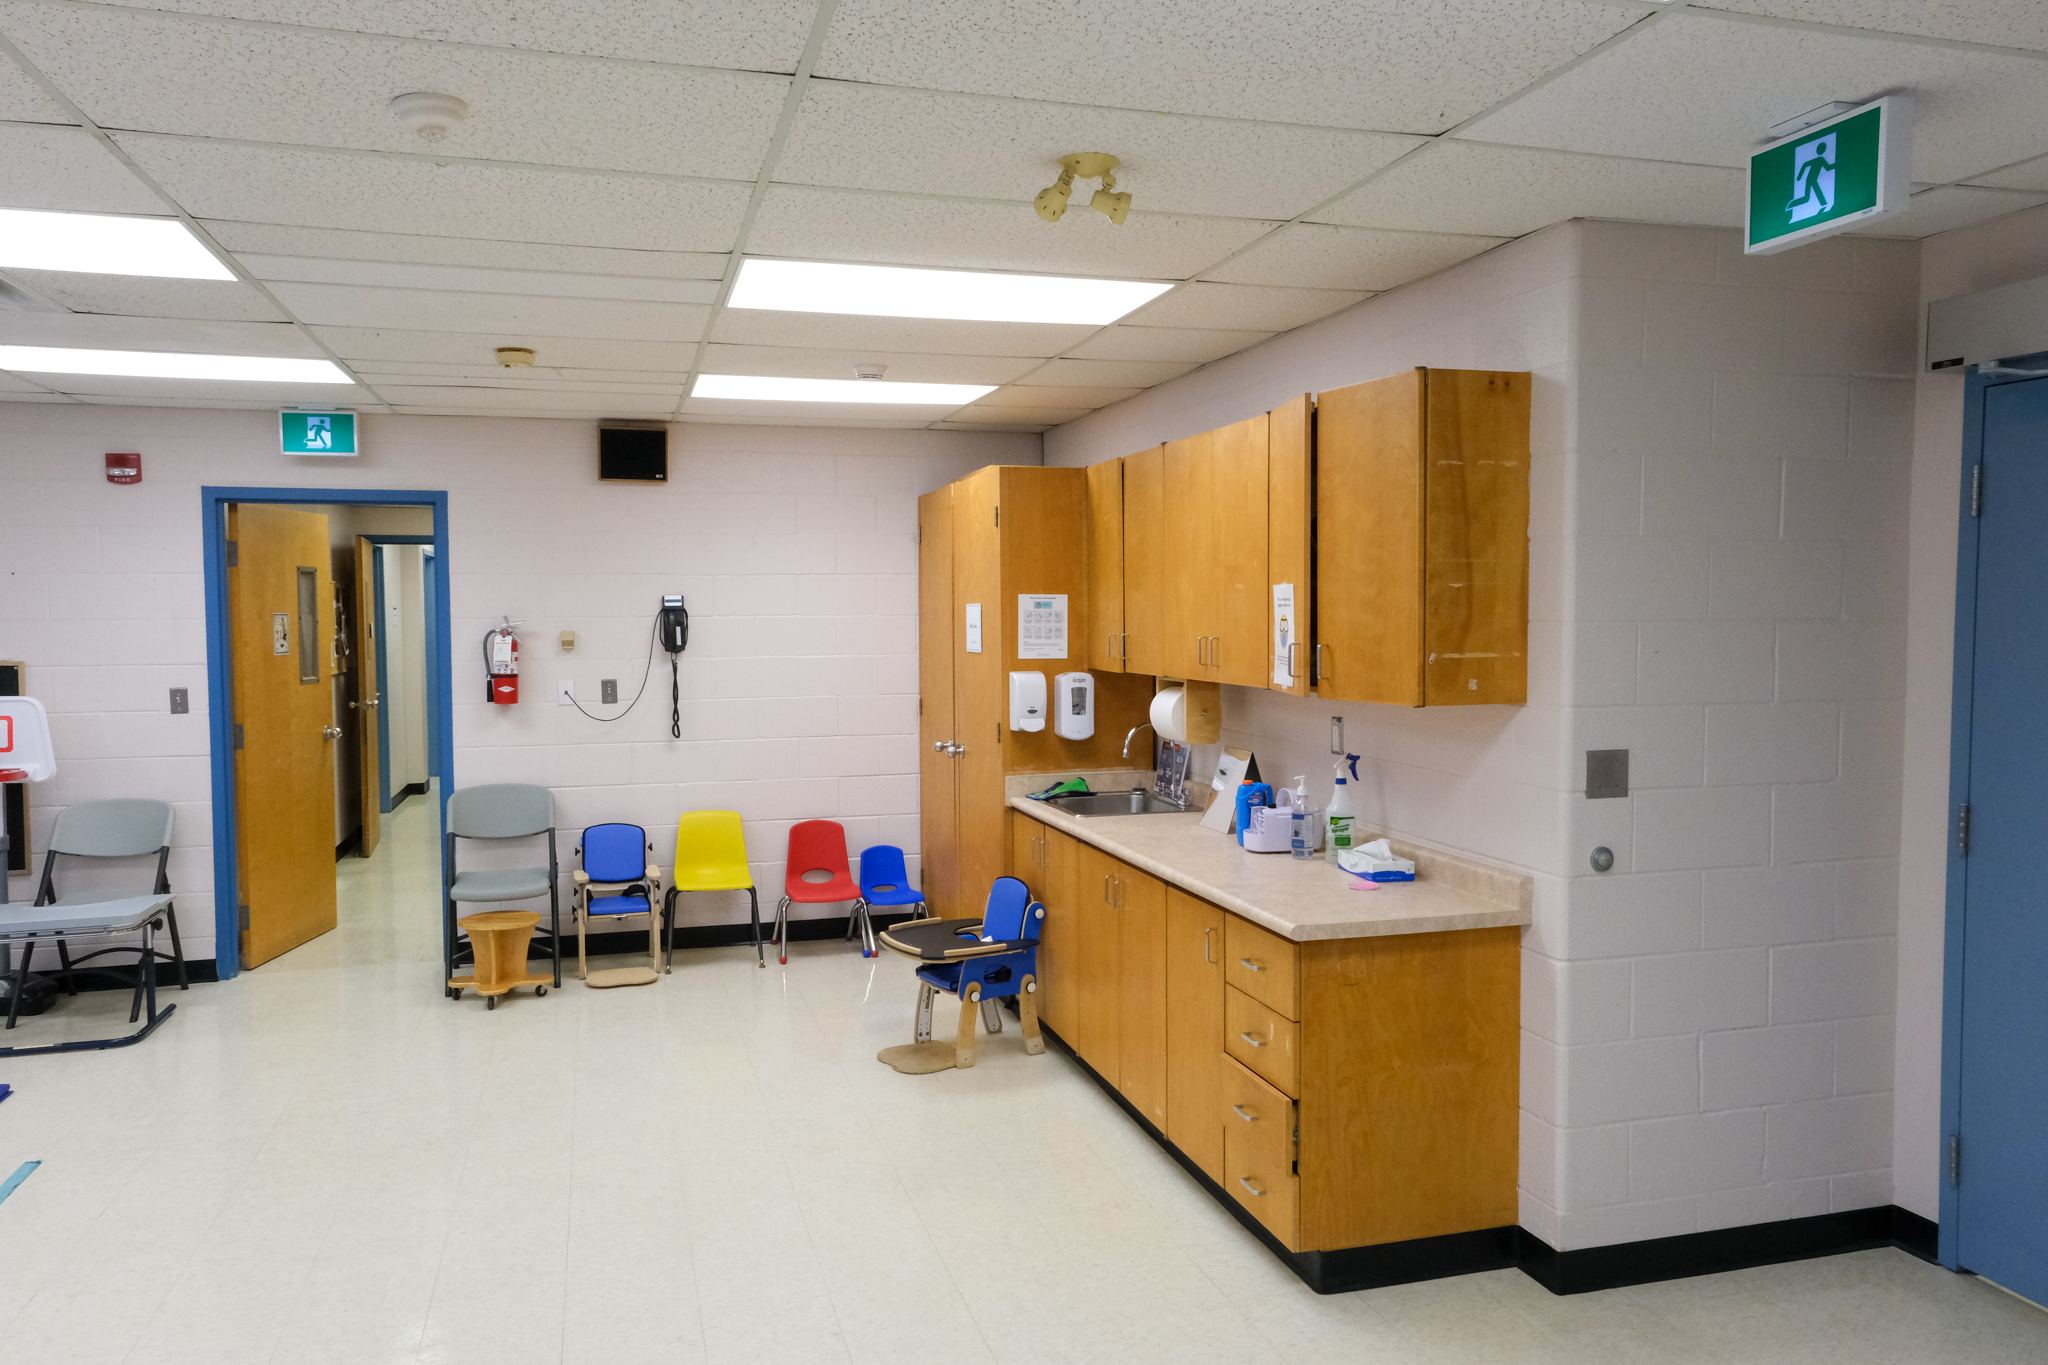 Therapy space at Grandview Kids Cawker site